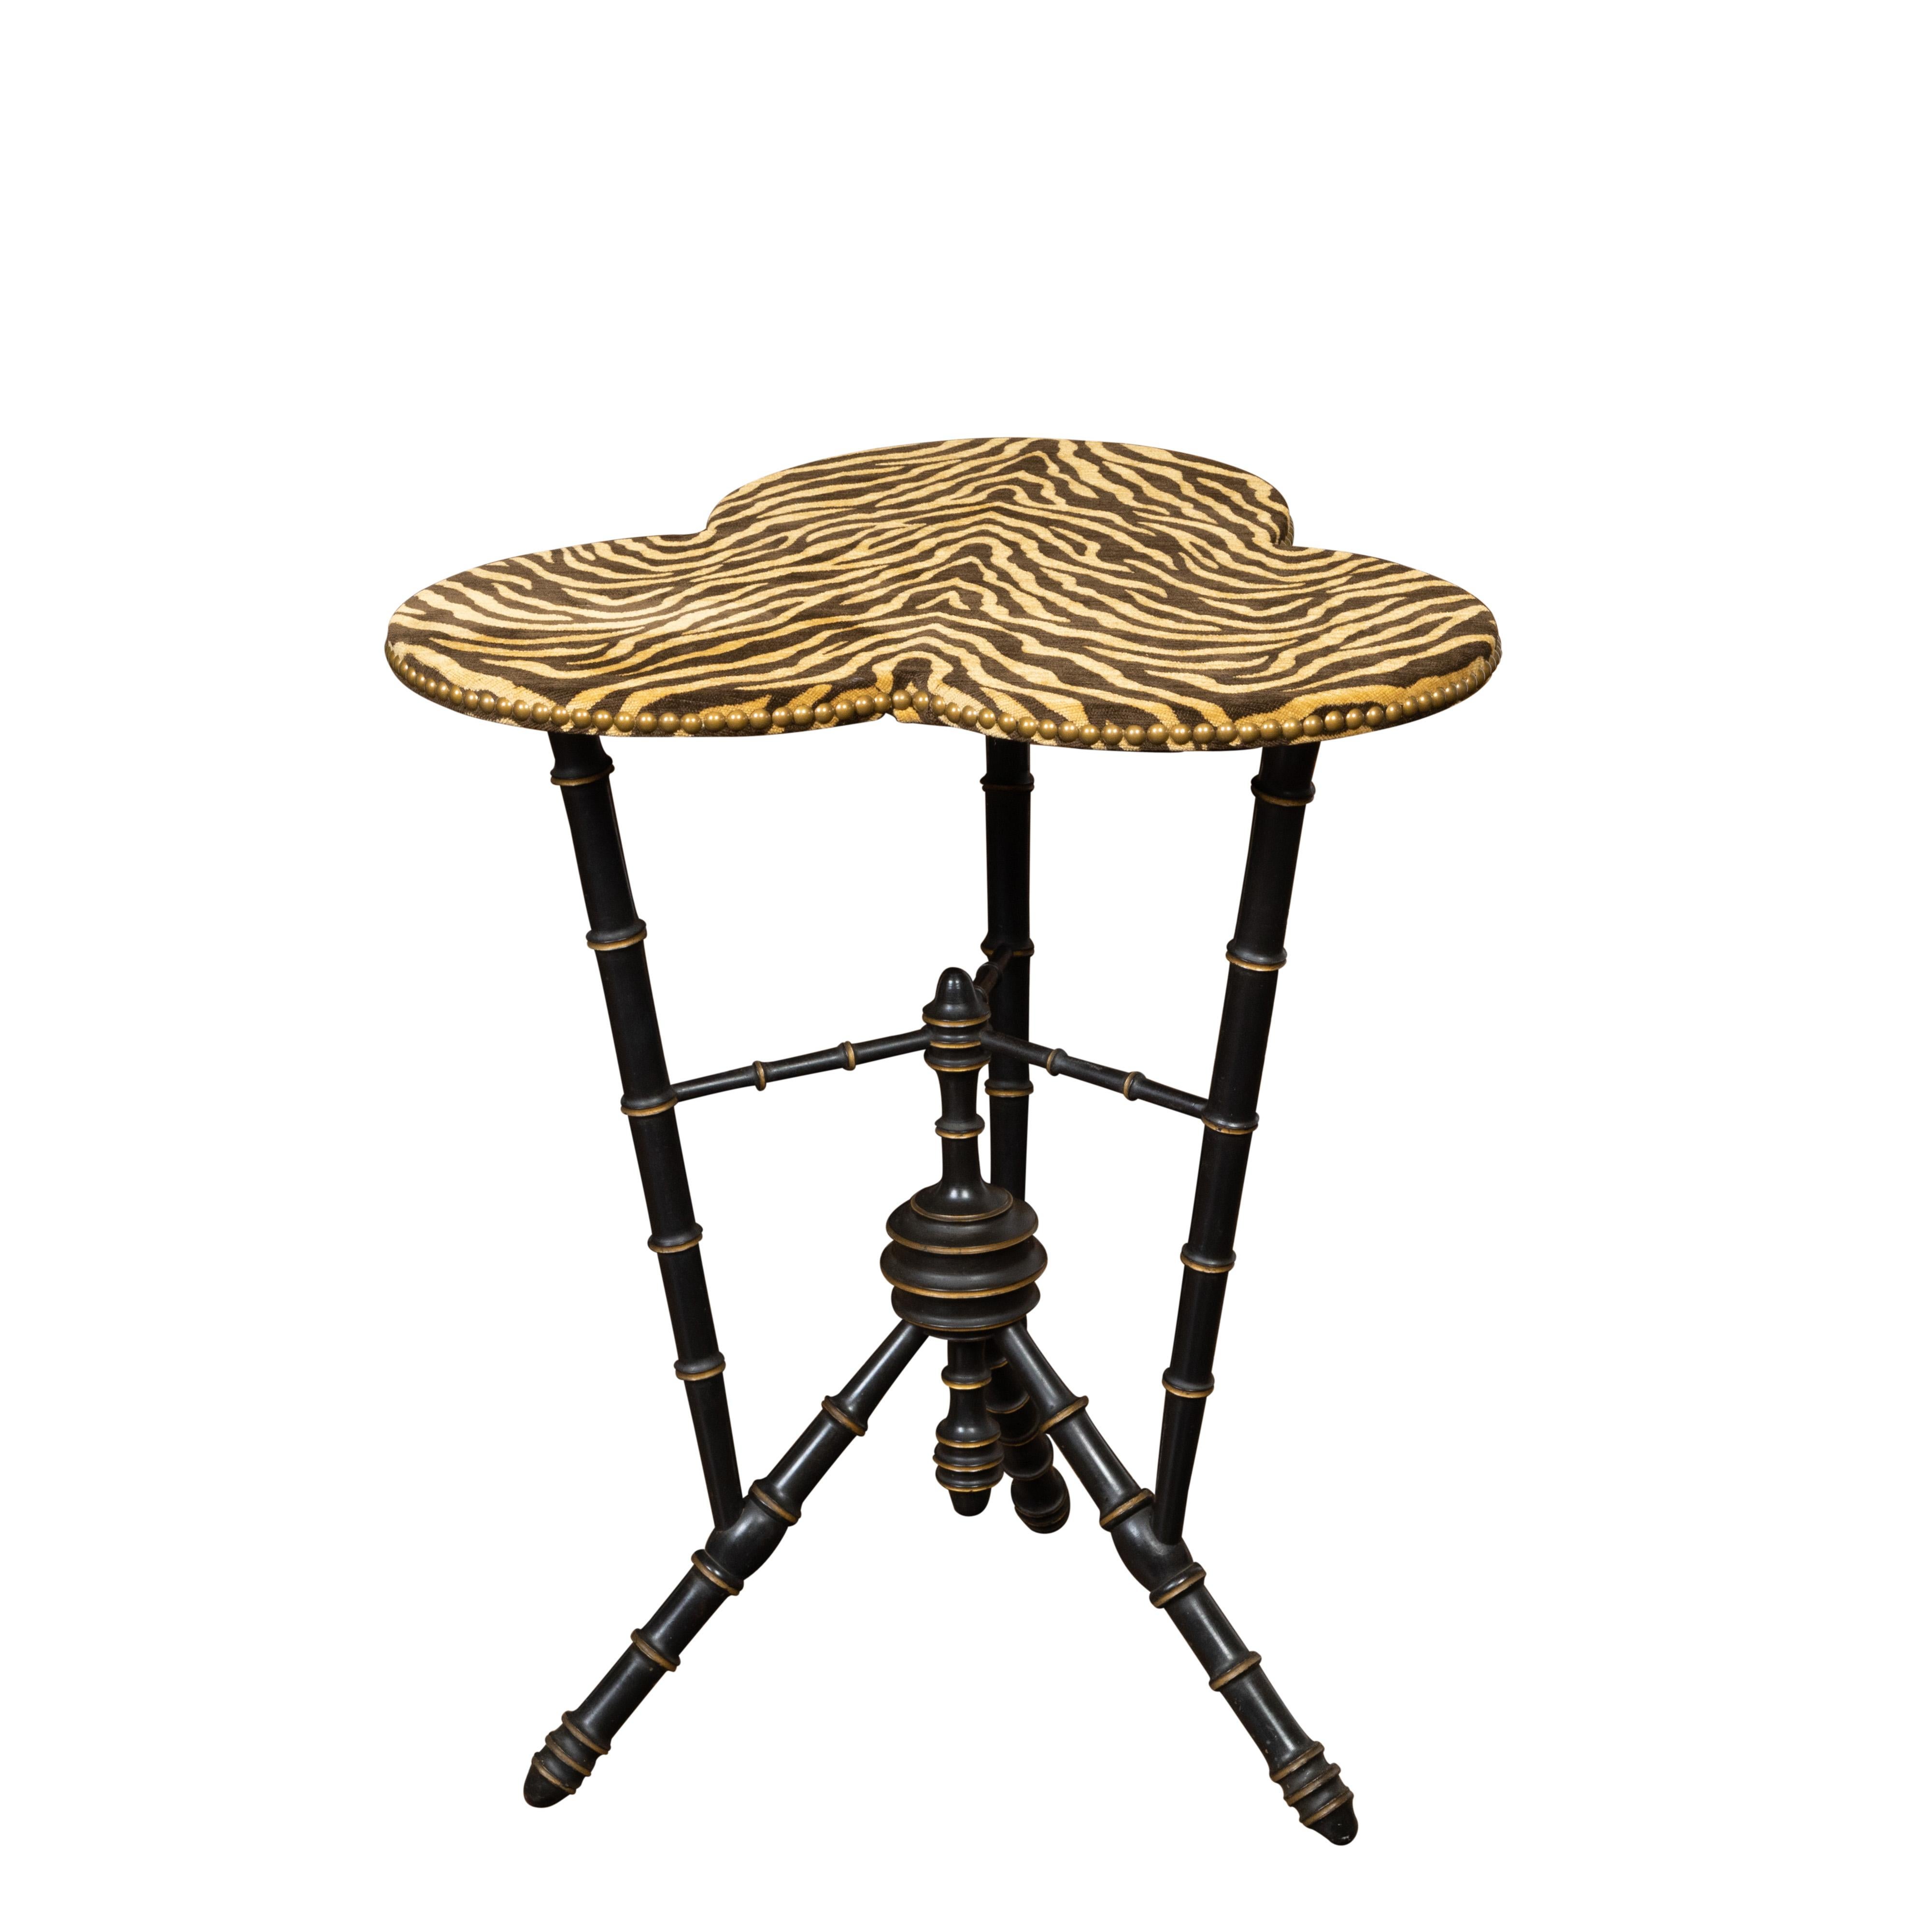 English 1880s Ebonized Faux Bamboo Side Table with Clover Leaf Upholstered Top